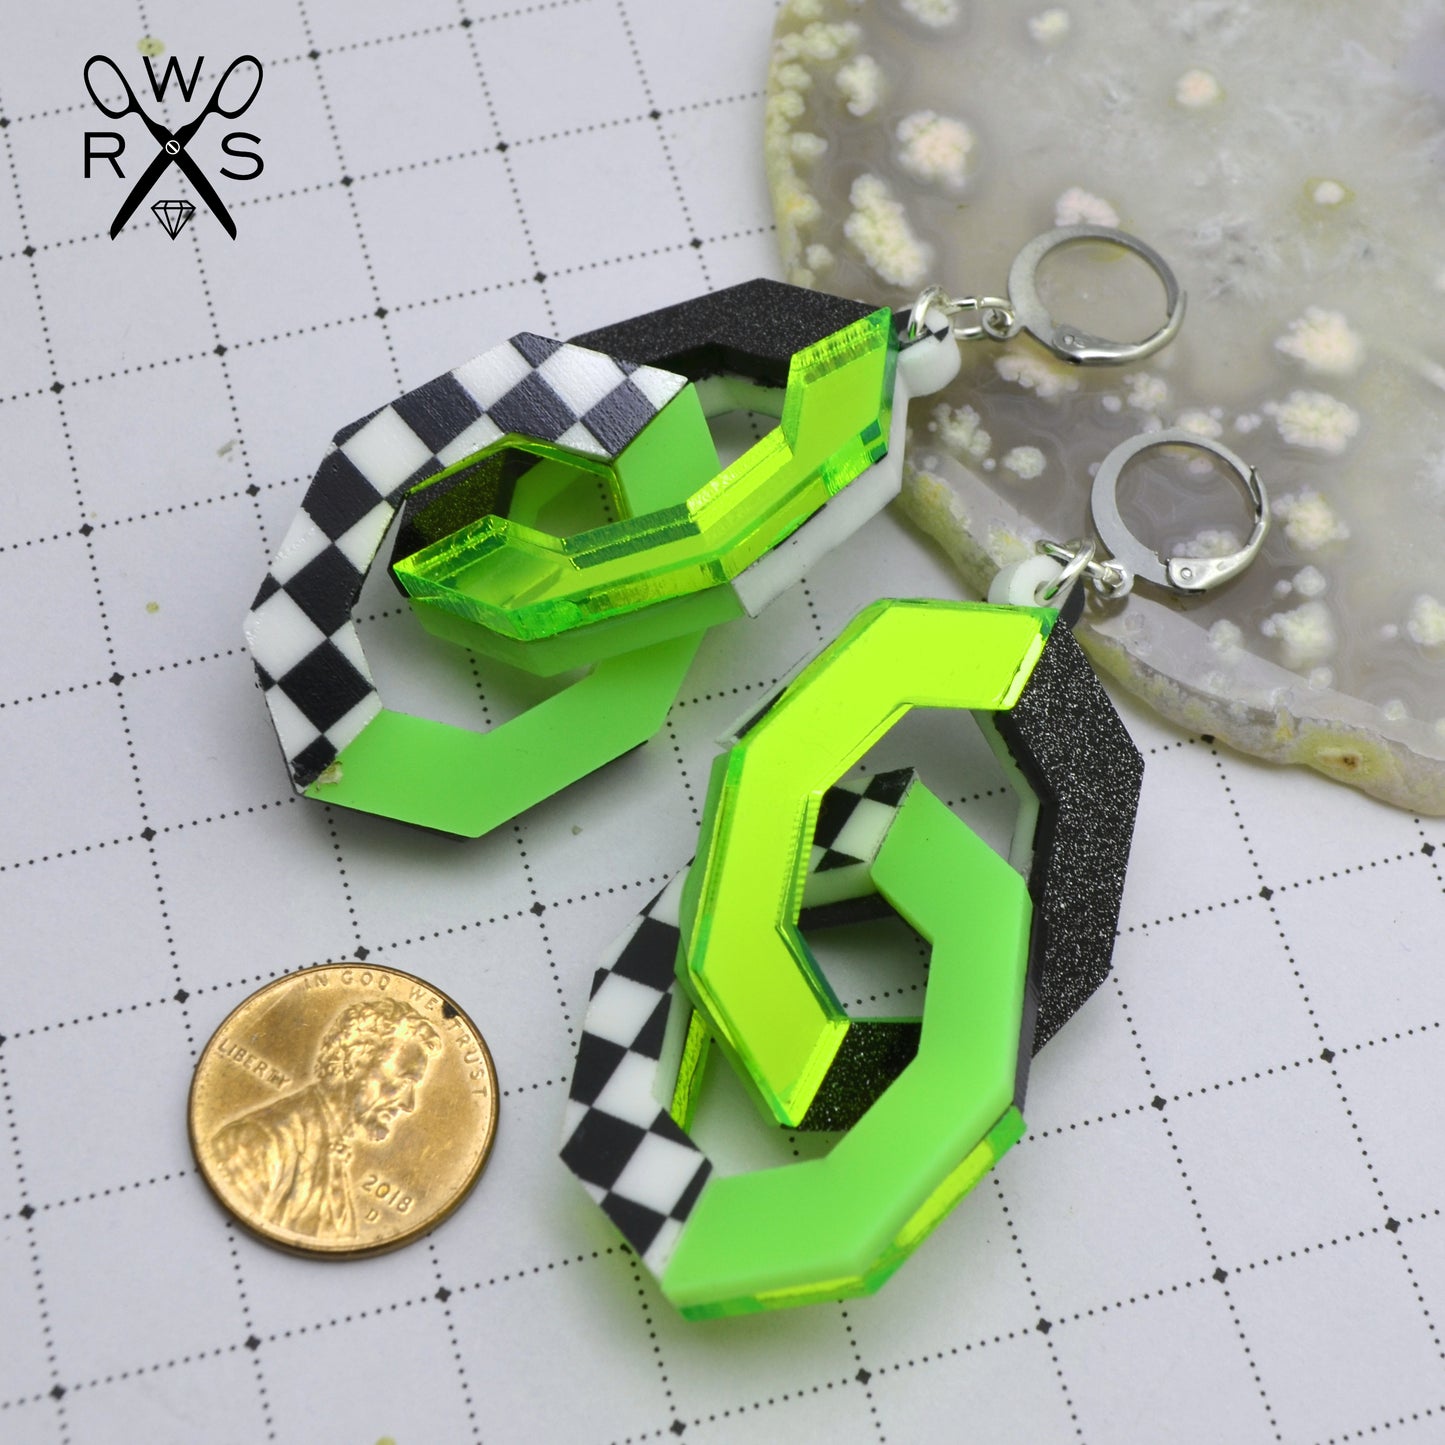 LINKED UP Laser Cut Acrylic Chain Link Dangle Earrings in Lime Green and Checkered Black and White